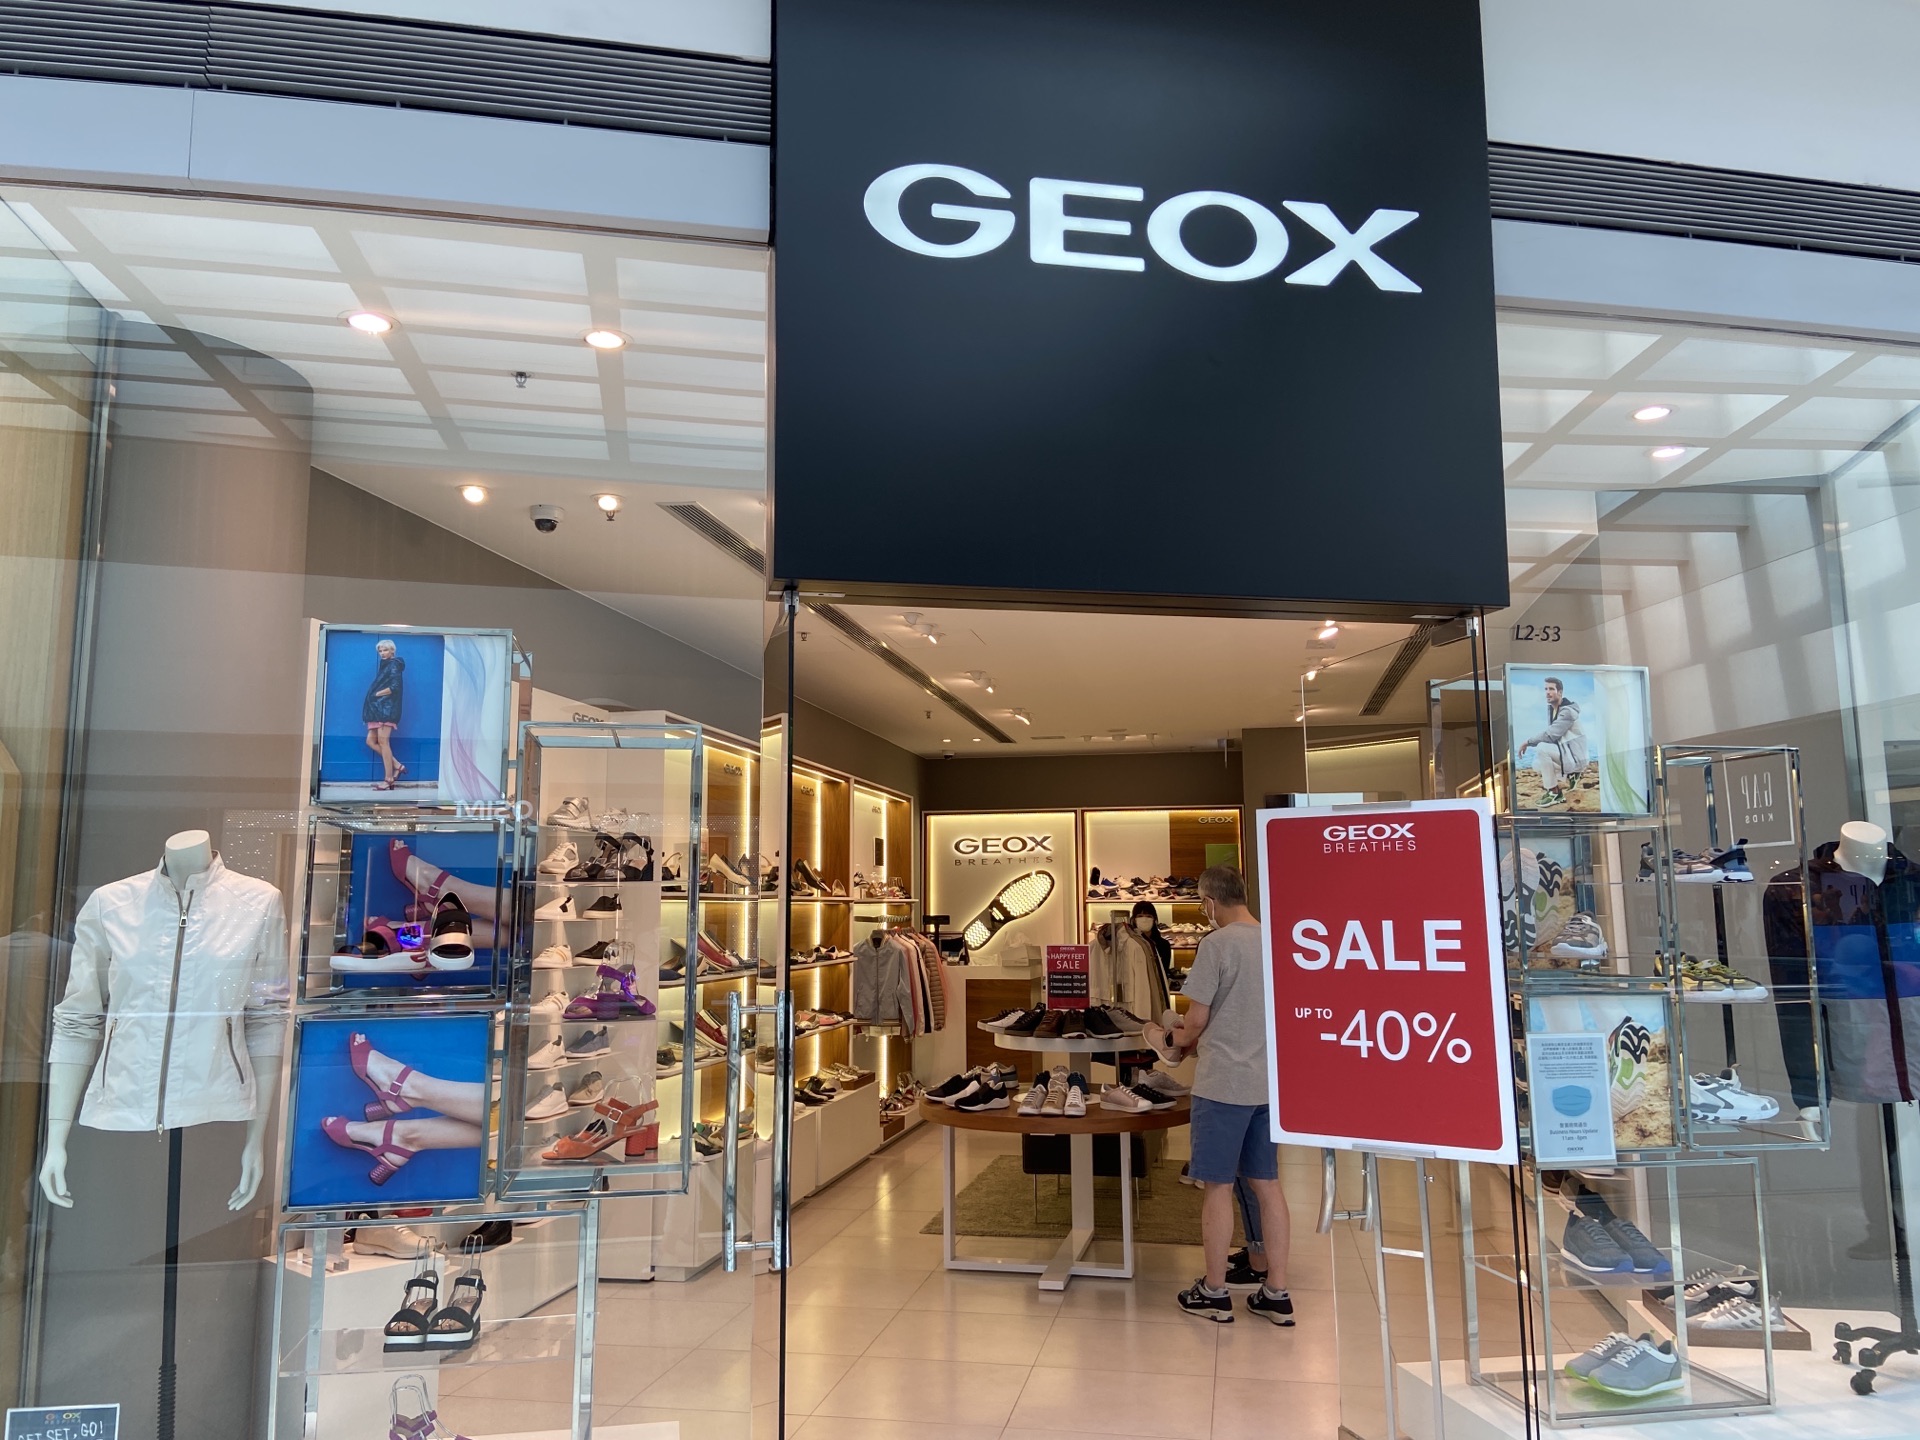 GEOX(太古城中心一店) travel guidebook –must visit attractions in Hong Kong – GEOX(太古城中心一店)  nearby recommendation – Trip.com